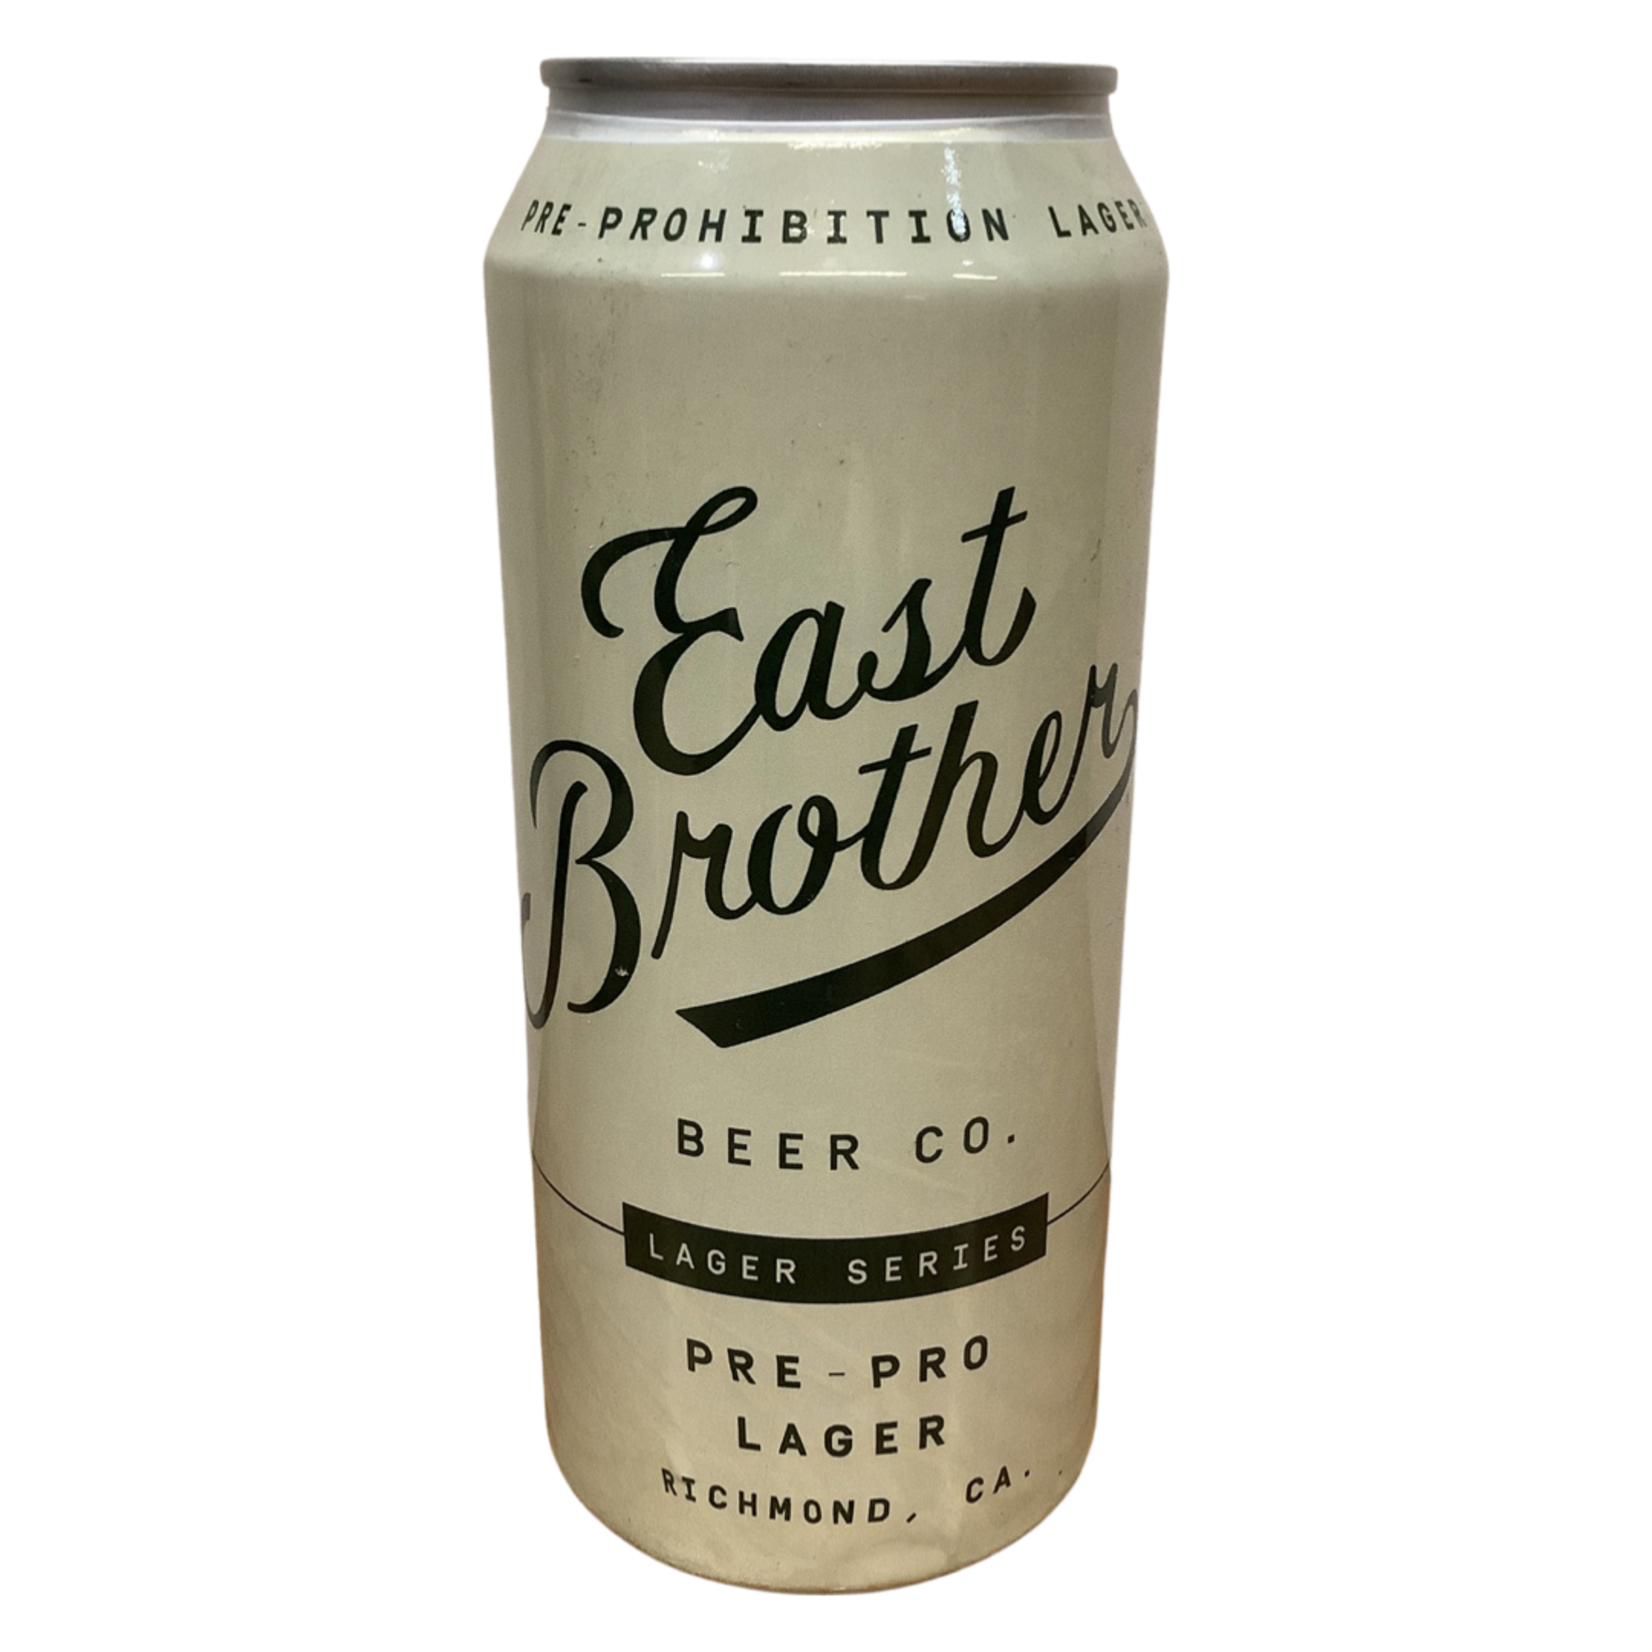 East Brother "Pre-Pro" Lager 16 OZ, Richmond CA